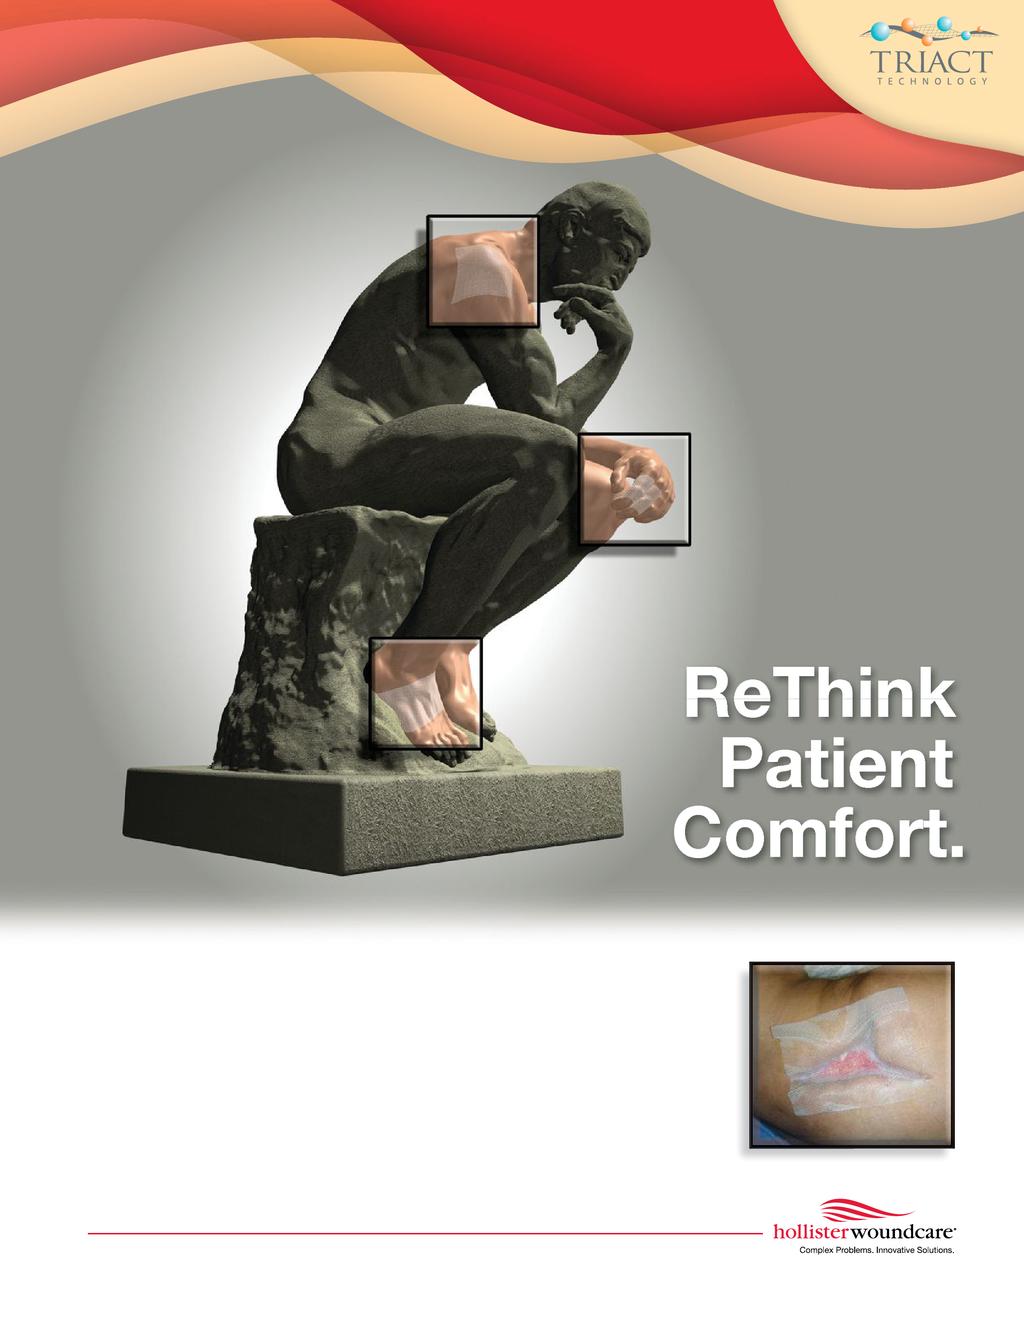 ReThink Patient Comfort. Introducing oduc g the t e new ultra-conformable RESTORE Contact Layer FLEX dressing RESTORE Technology. featuring g TRIACT T Technology echnology echn.